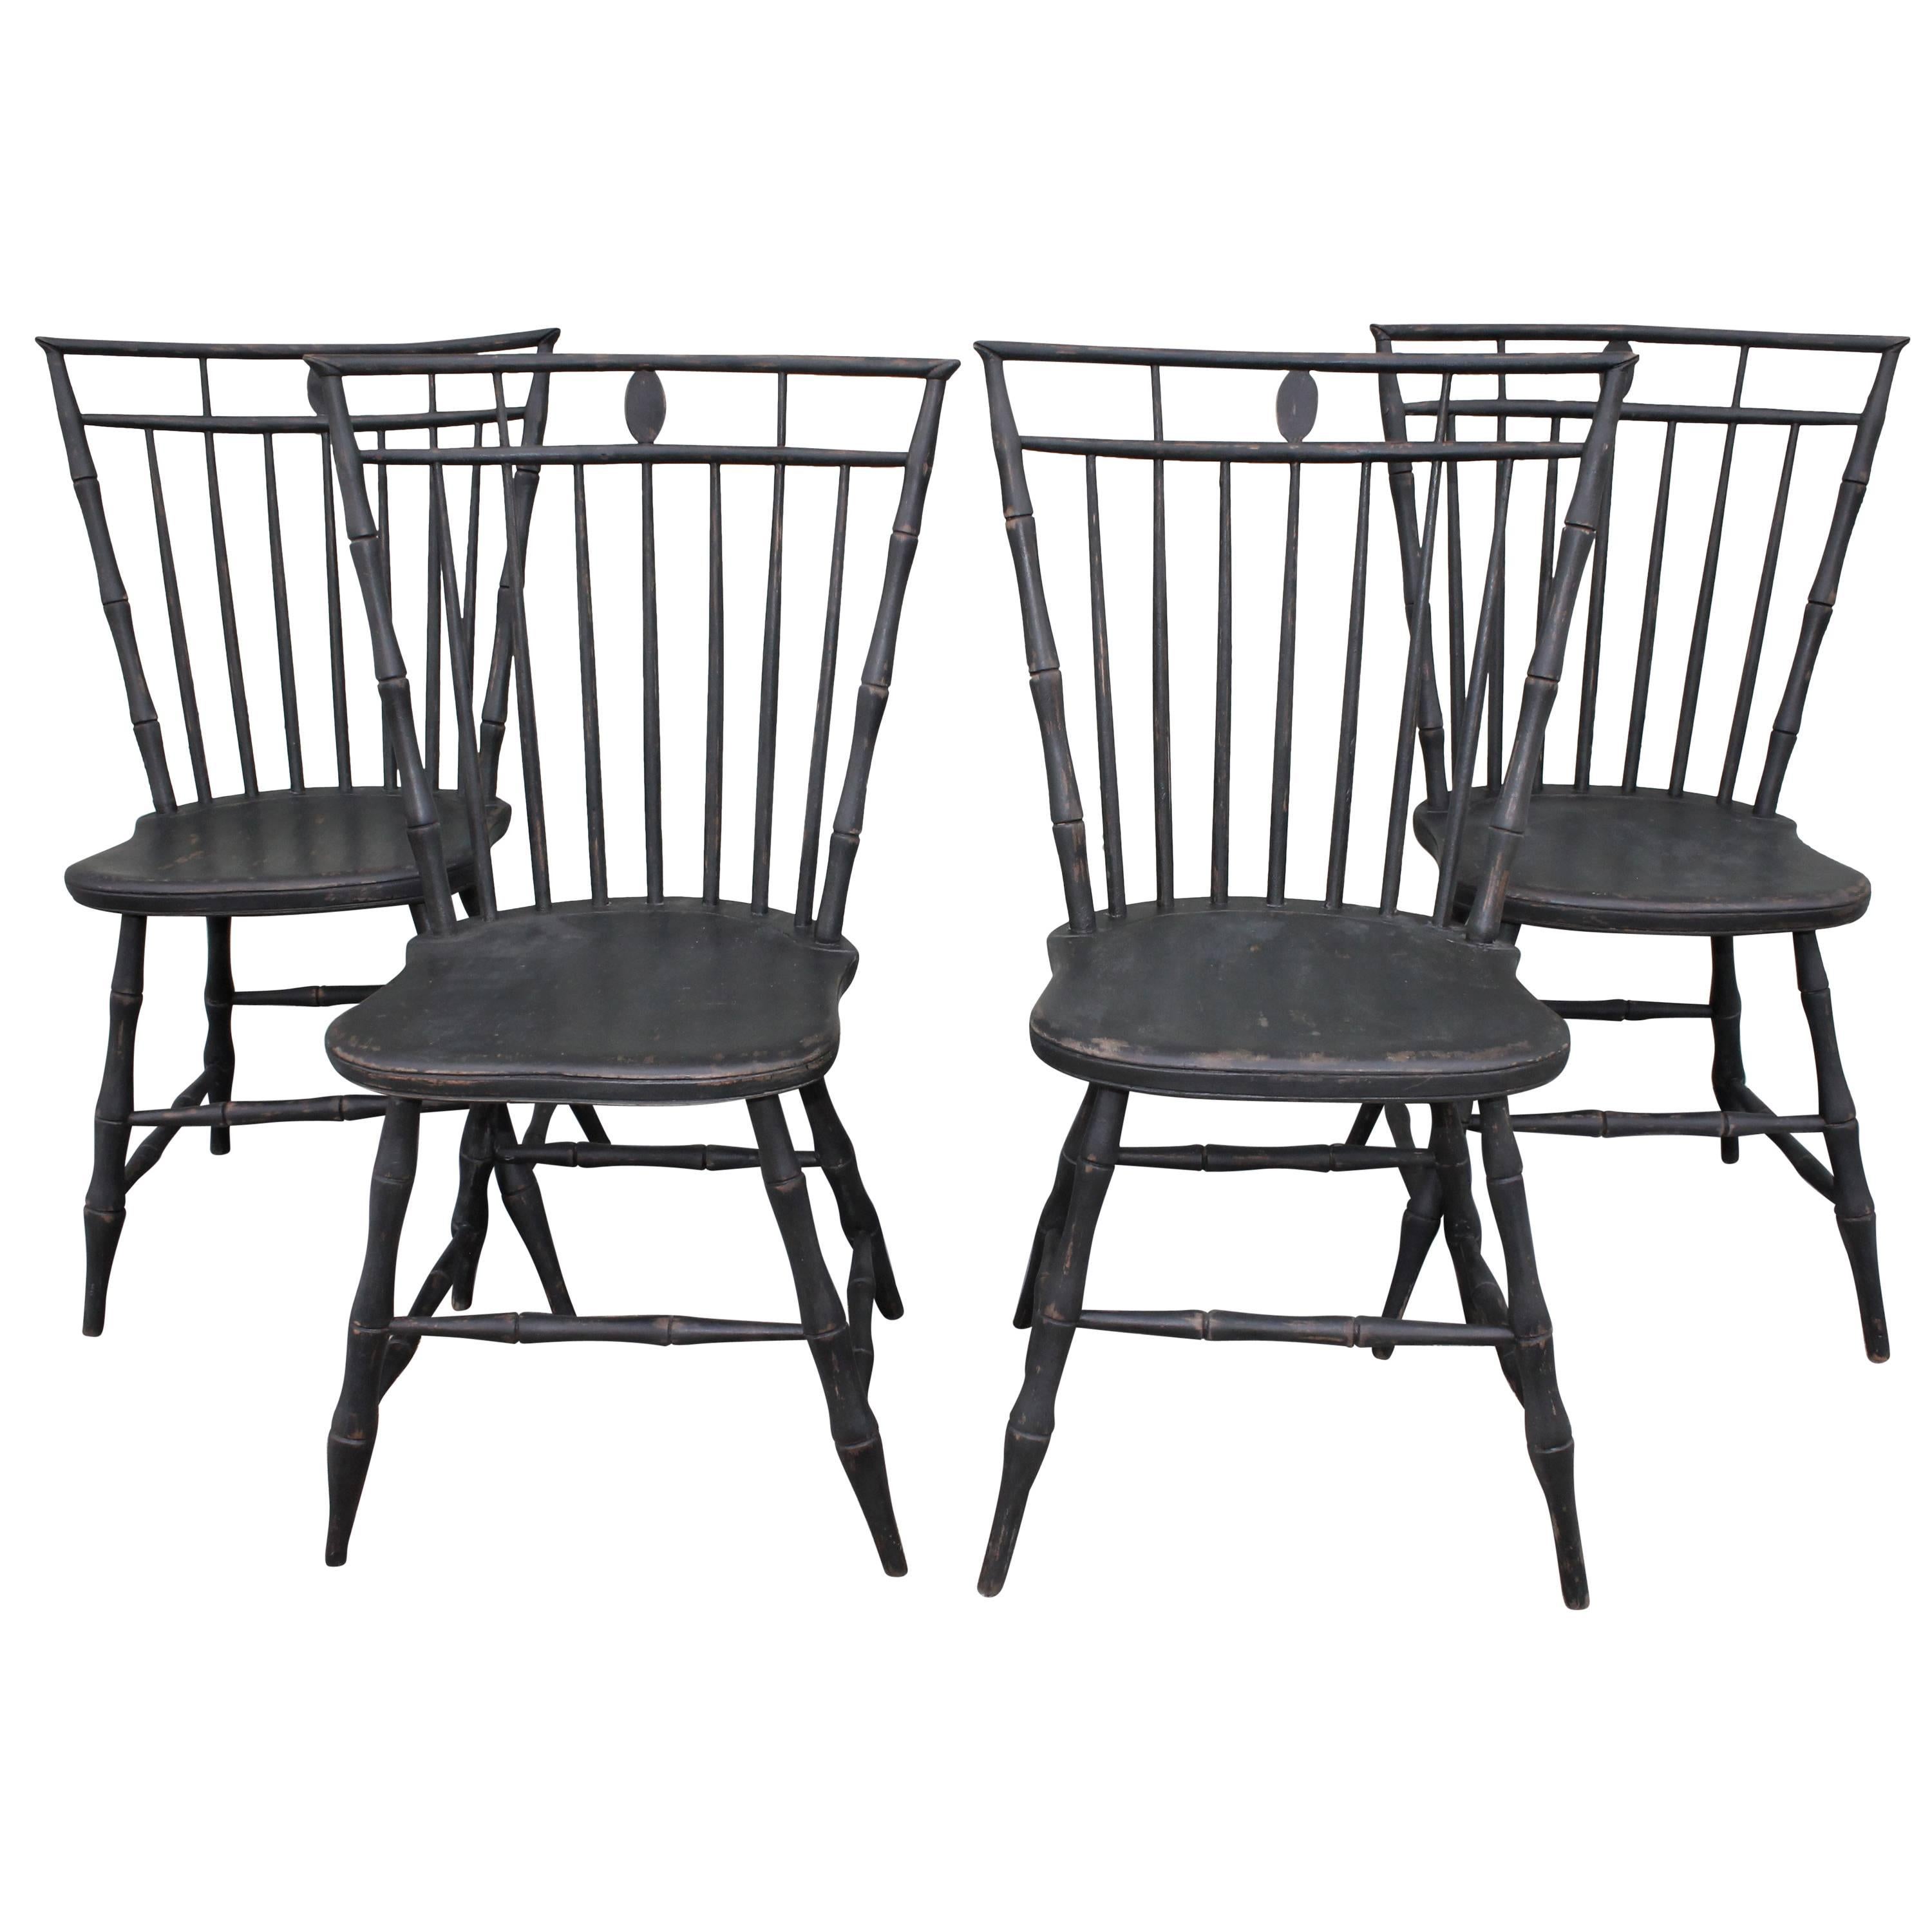 19th Century Birdcage Windsor Chairs in Windsor Green, Set of Four